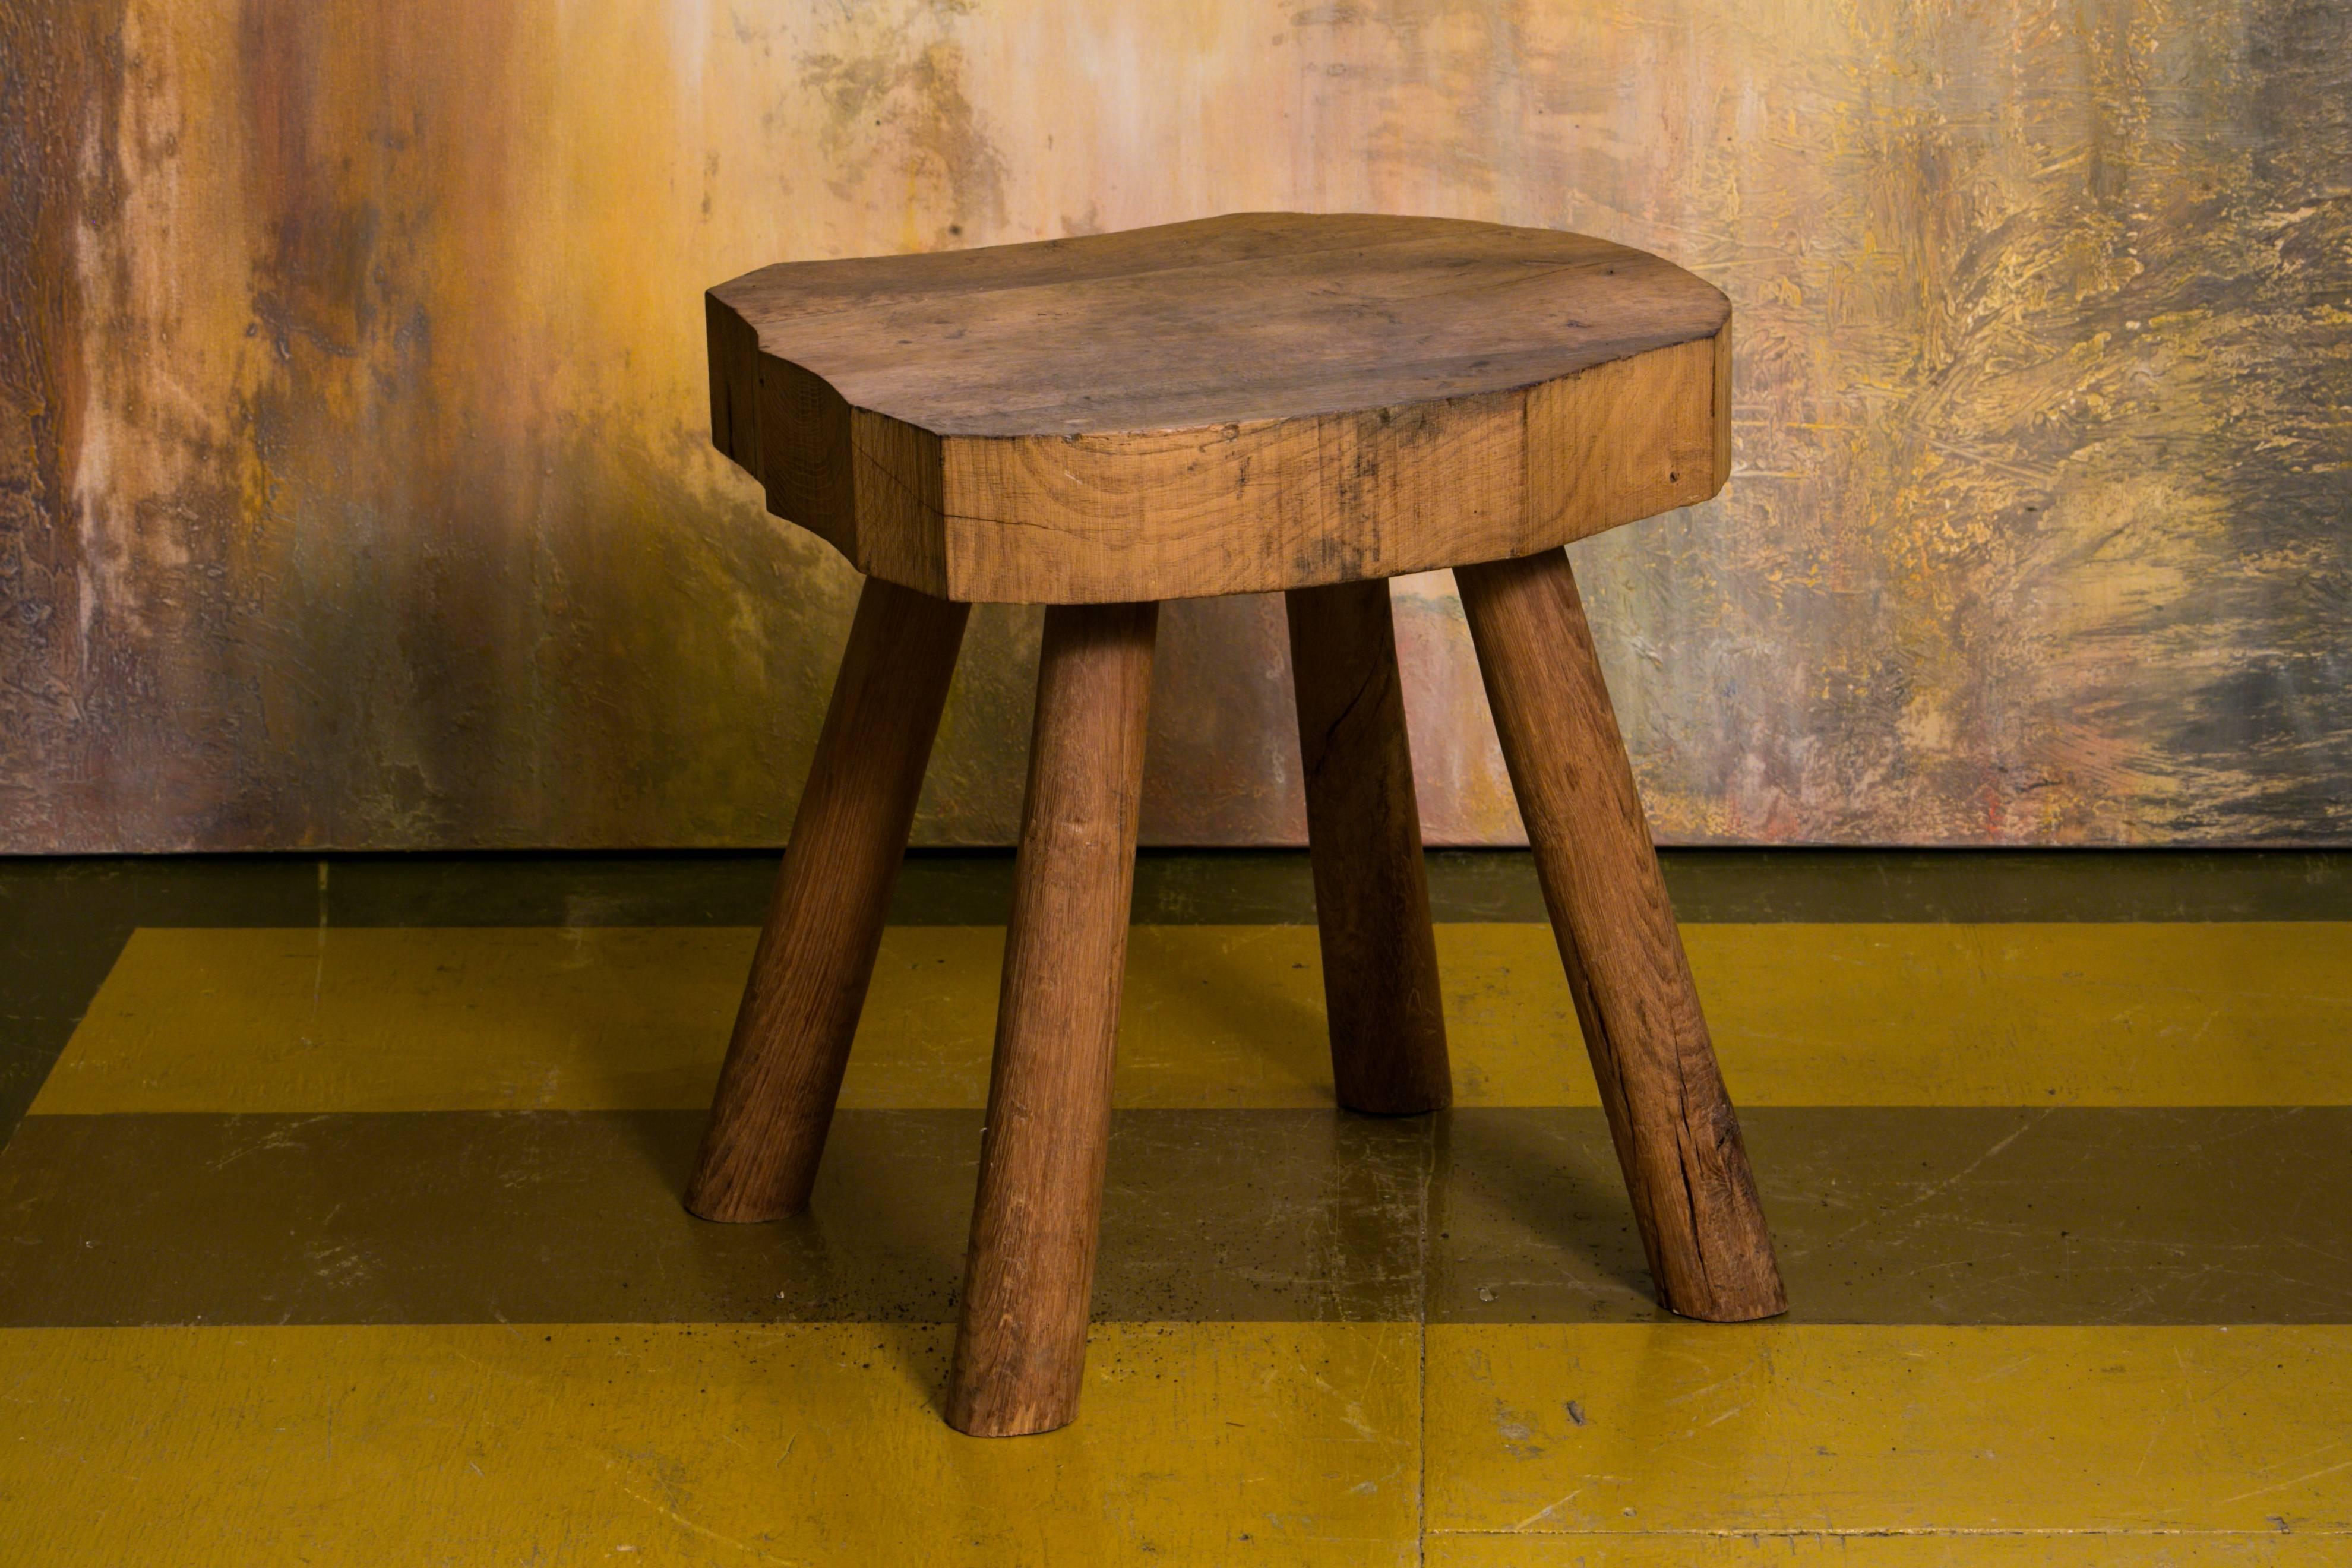 Rustic, Primitive wooden stool with four legs and a thick wood top.
Charming and handcrafted. Would make a great low side table.